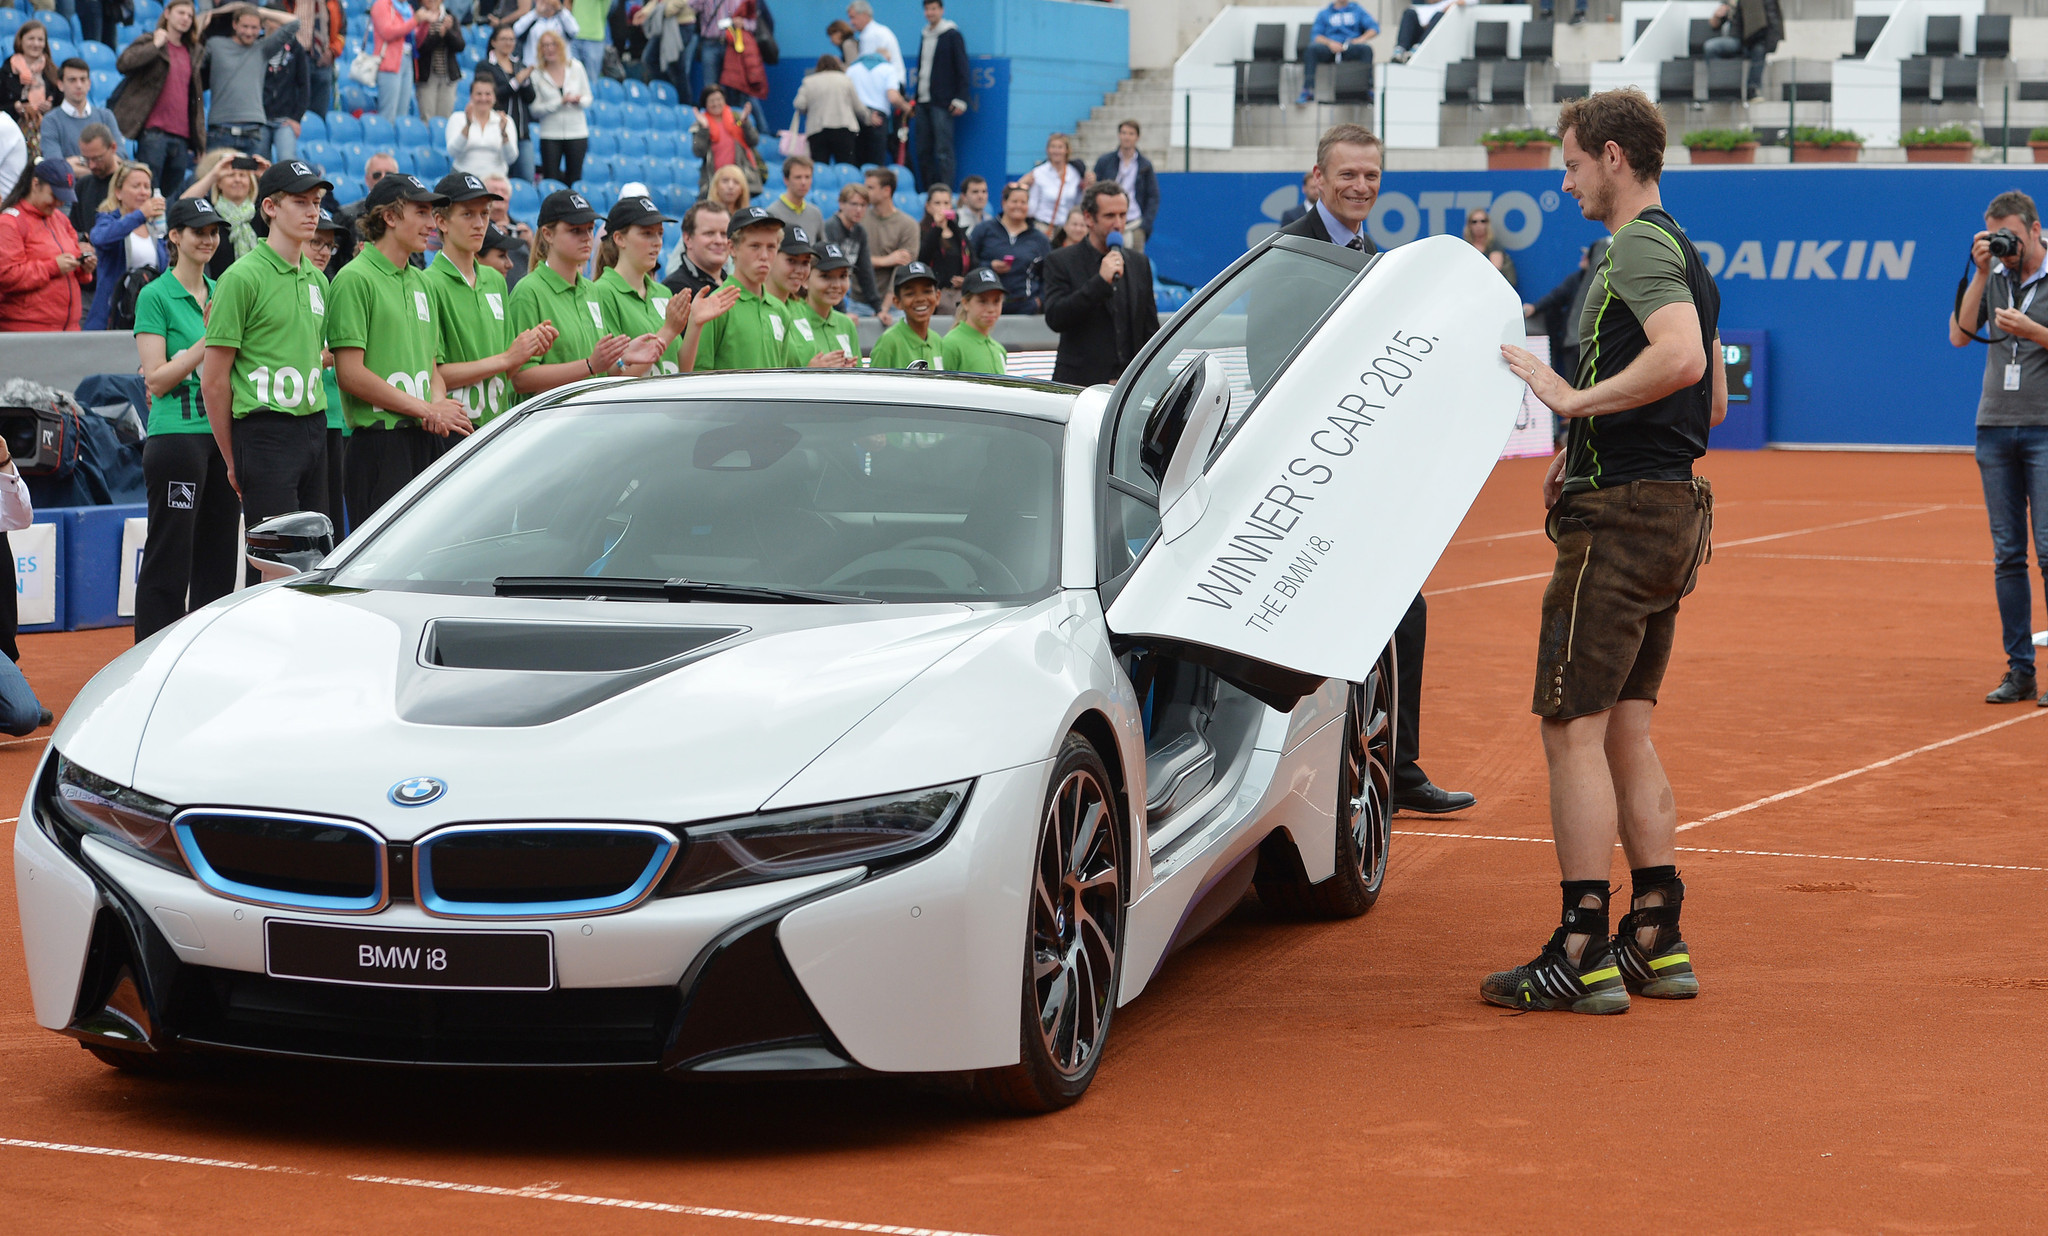 Andy Murray wins rain-delayed BMW Open and new car - LA Times